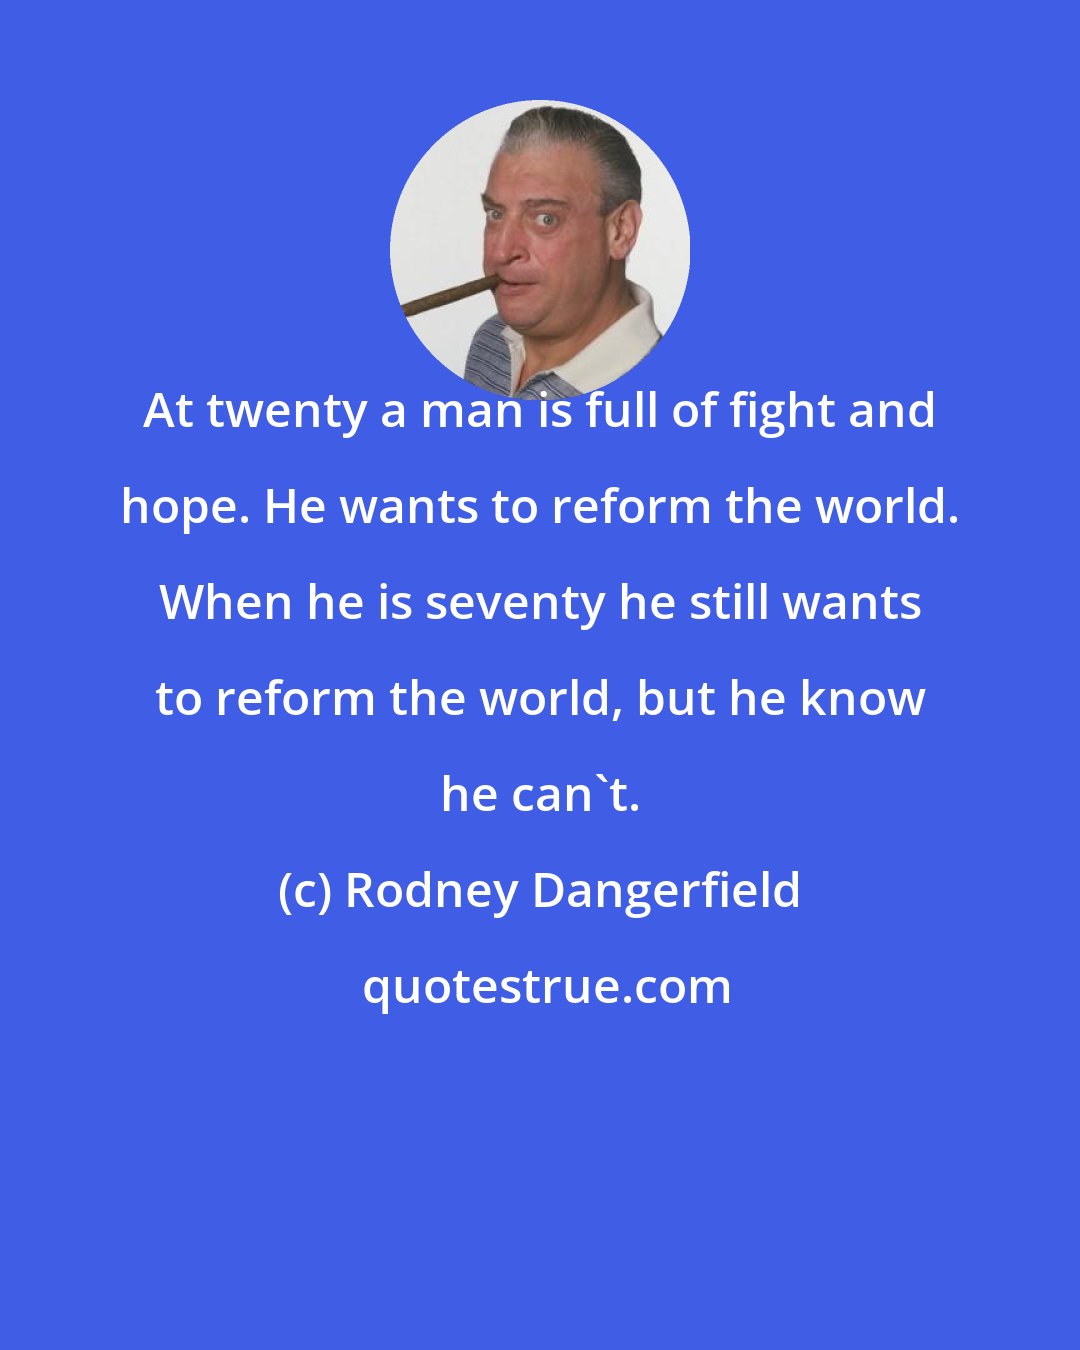 Rodney Dangerfield: At twenty a man is full of fight and hope. He wants to reform the world. When he is seventy he still wants to reform the world, but he know he can't.